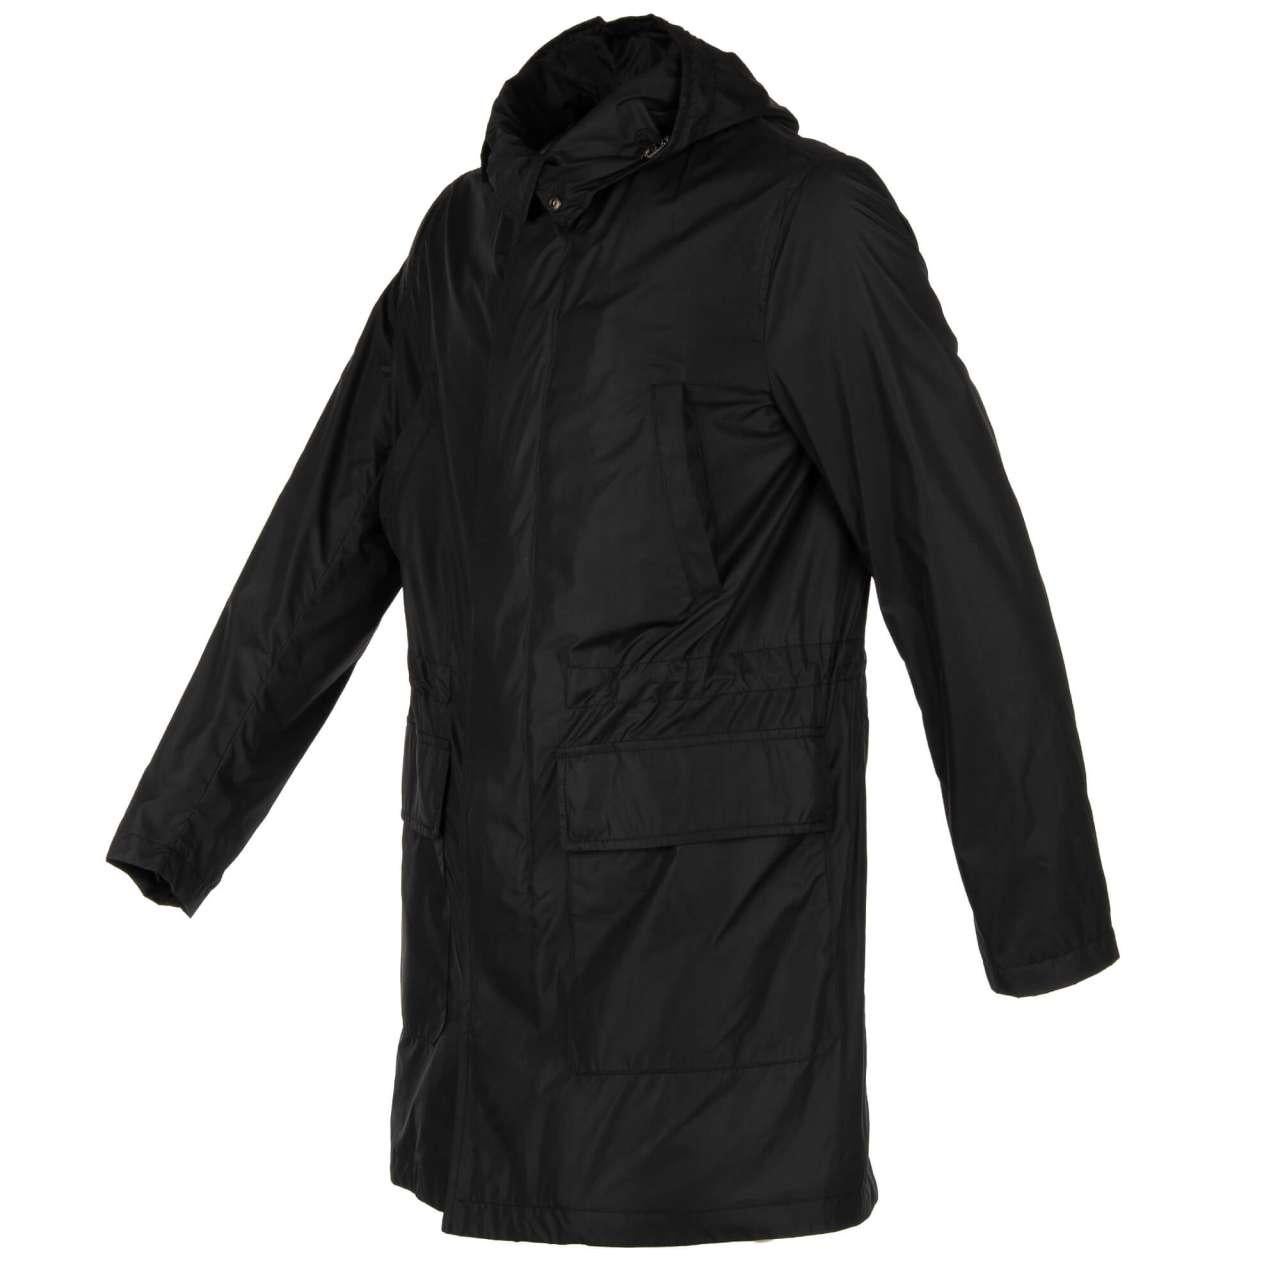 Dolce & Gabbana Classic Rain Parka Jacket with Pockets and Hoody Black 54 In Excellent Condition For Sale In Erkrath, DE